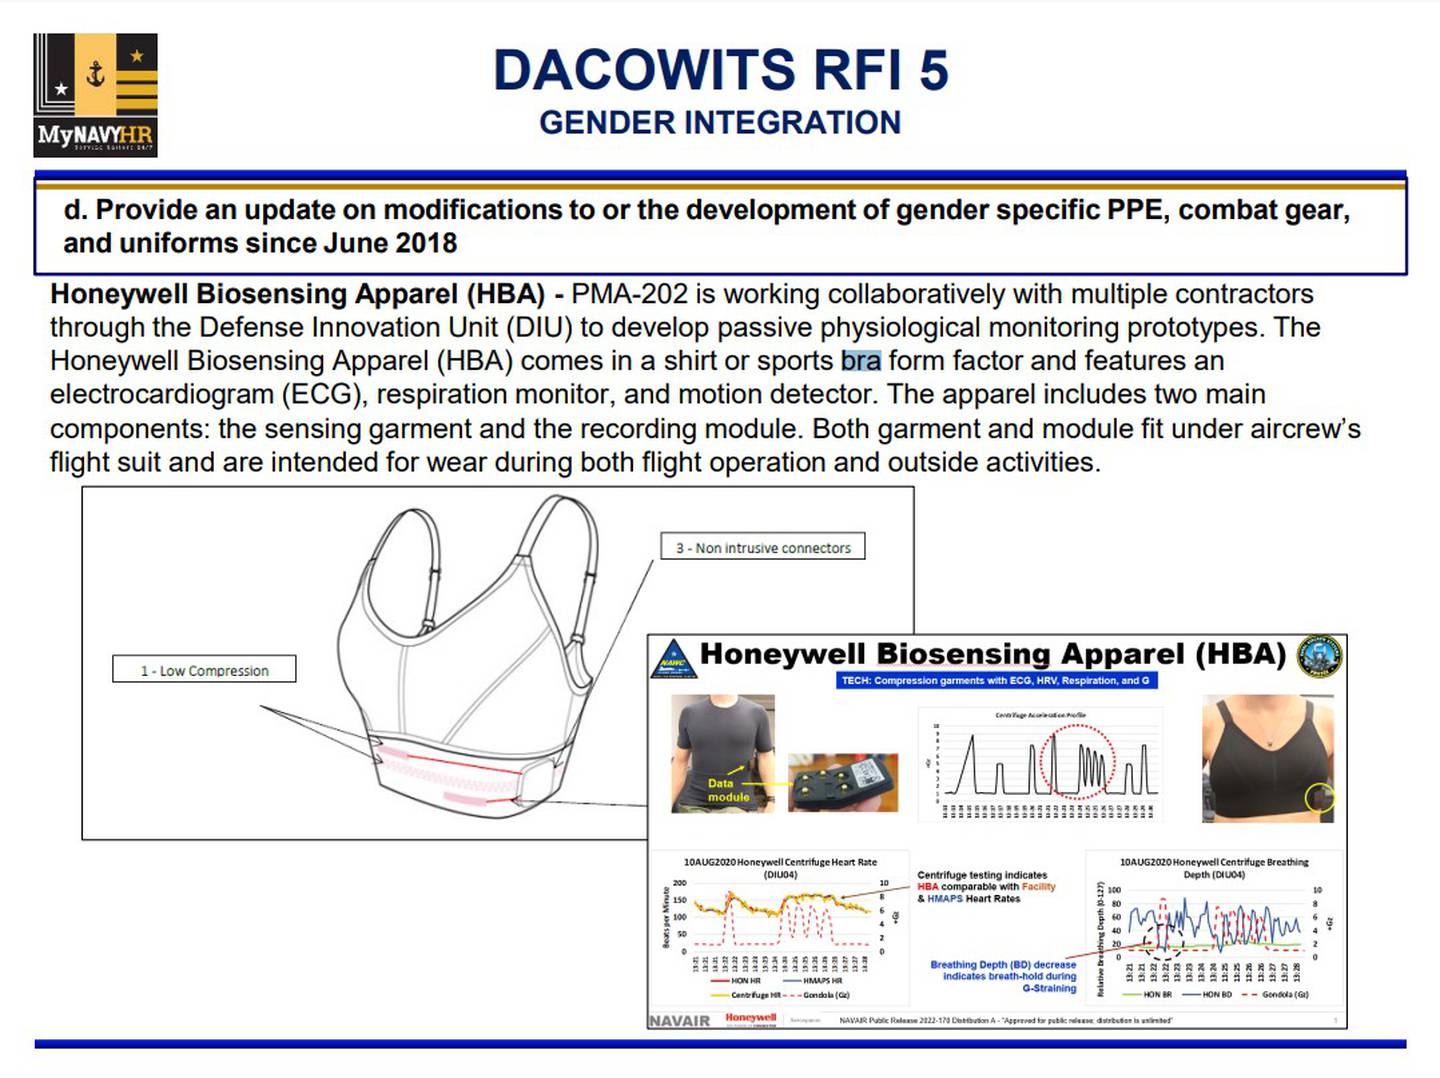 The Navy plans to make a design decision in 2023 on a biosensing bra and undershirt intended to monitor the vital signs of aircrew while in flight.